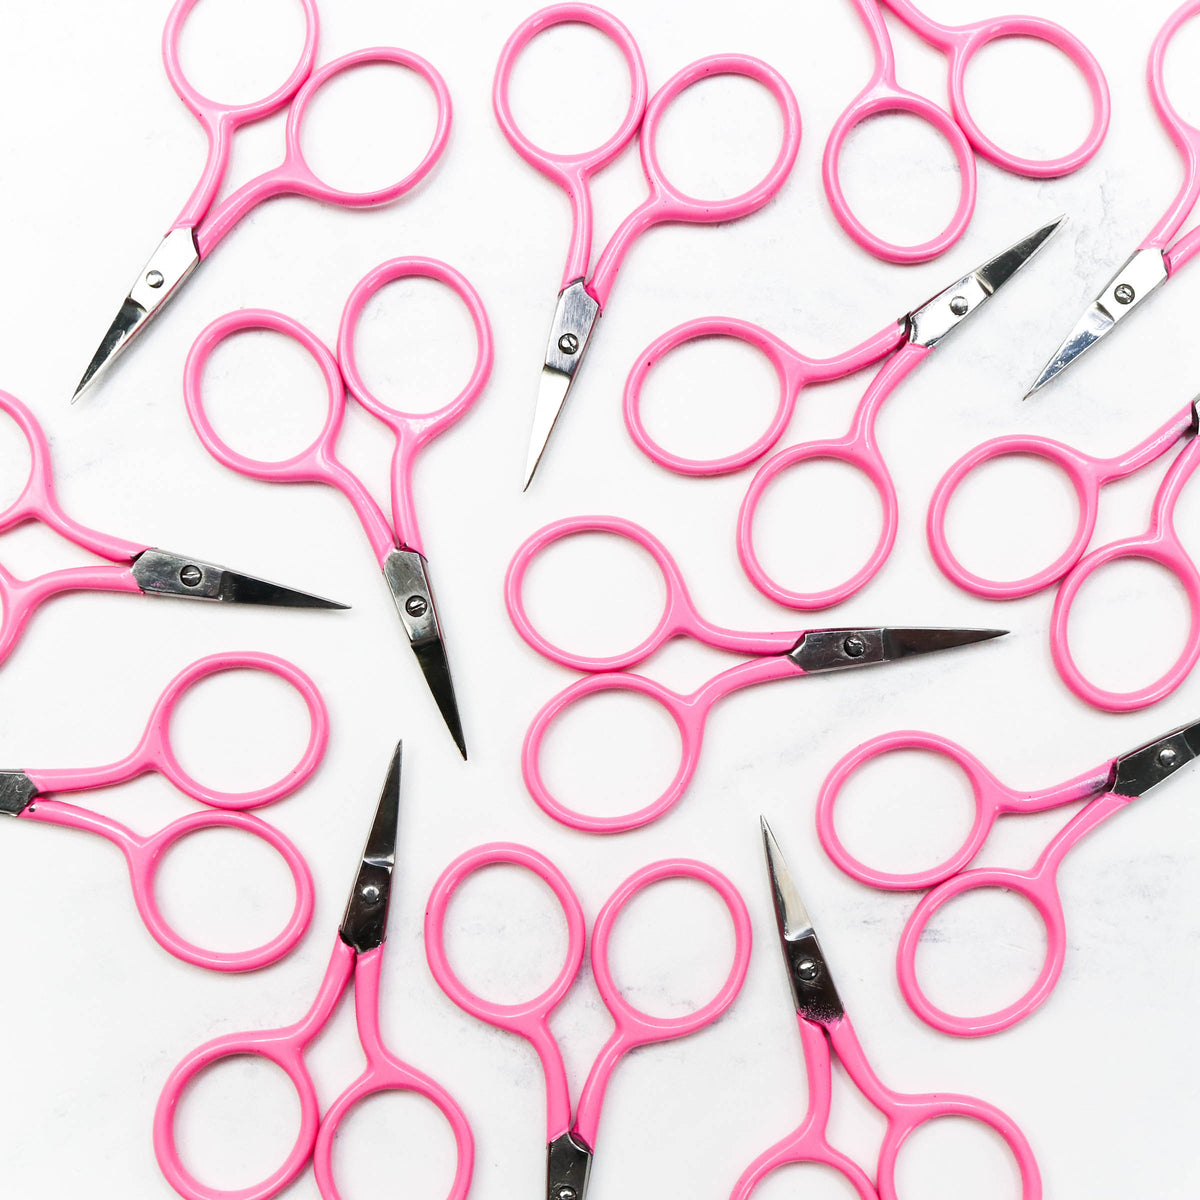 Tiny Snips Pink Embroidery Scissors